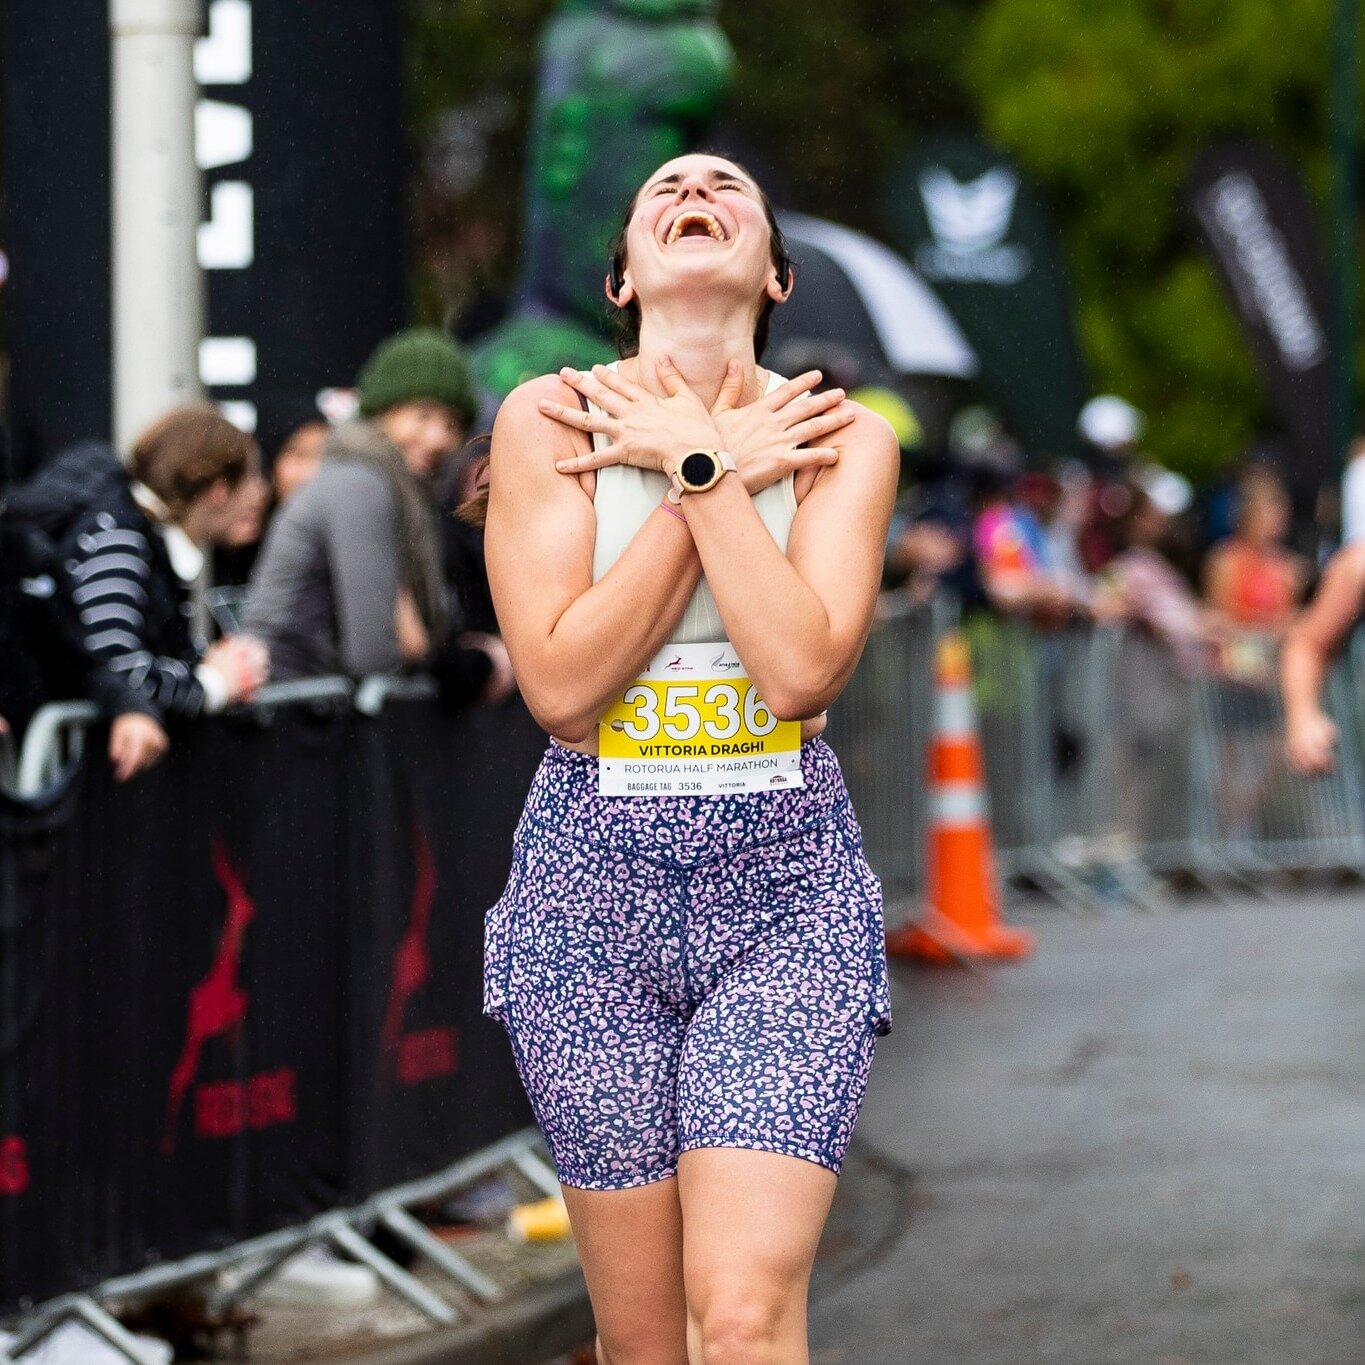 The emotions were running high at the finish line 🧡 We are so proud of every single participant and are privileged you chose to join us in Rotorua. 

Who's already counting down the days 'til we get to do this all again 🤩

📸 @alishalovrich 

#roto